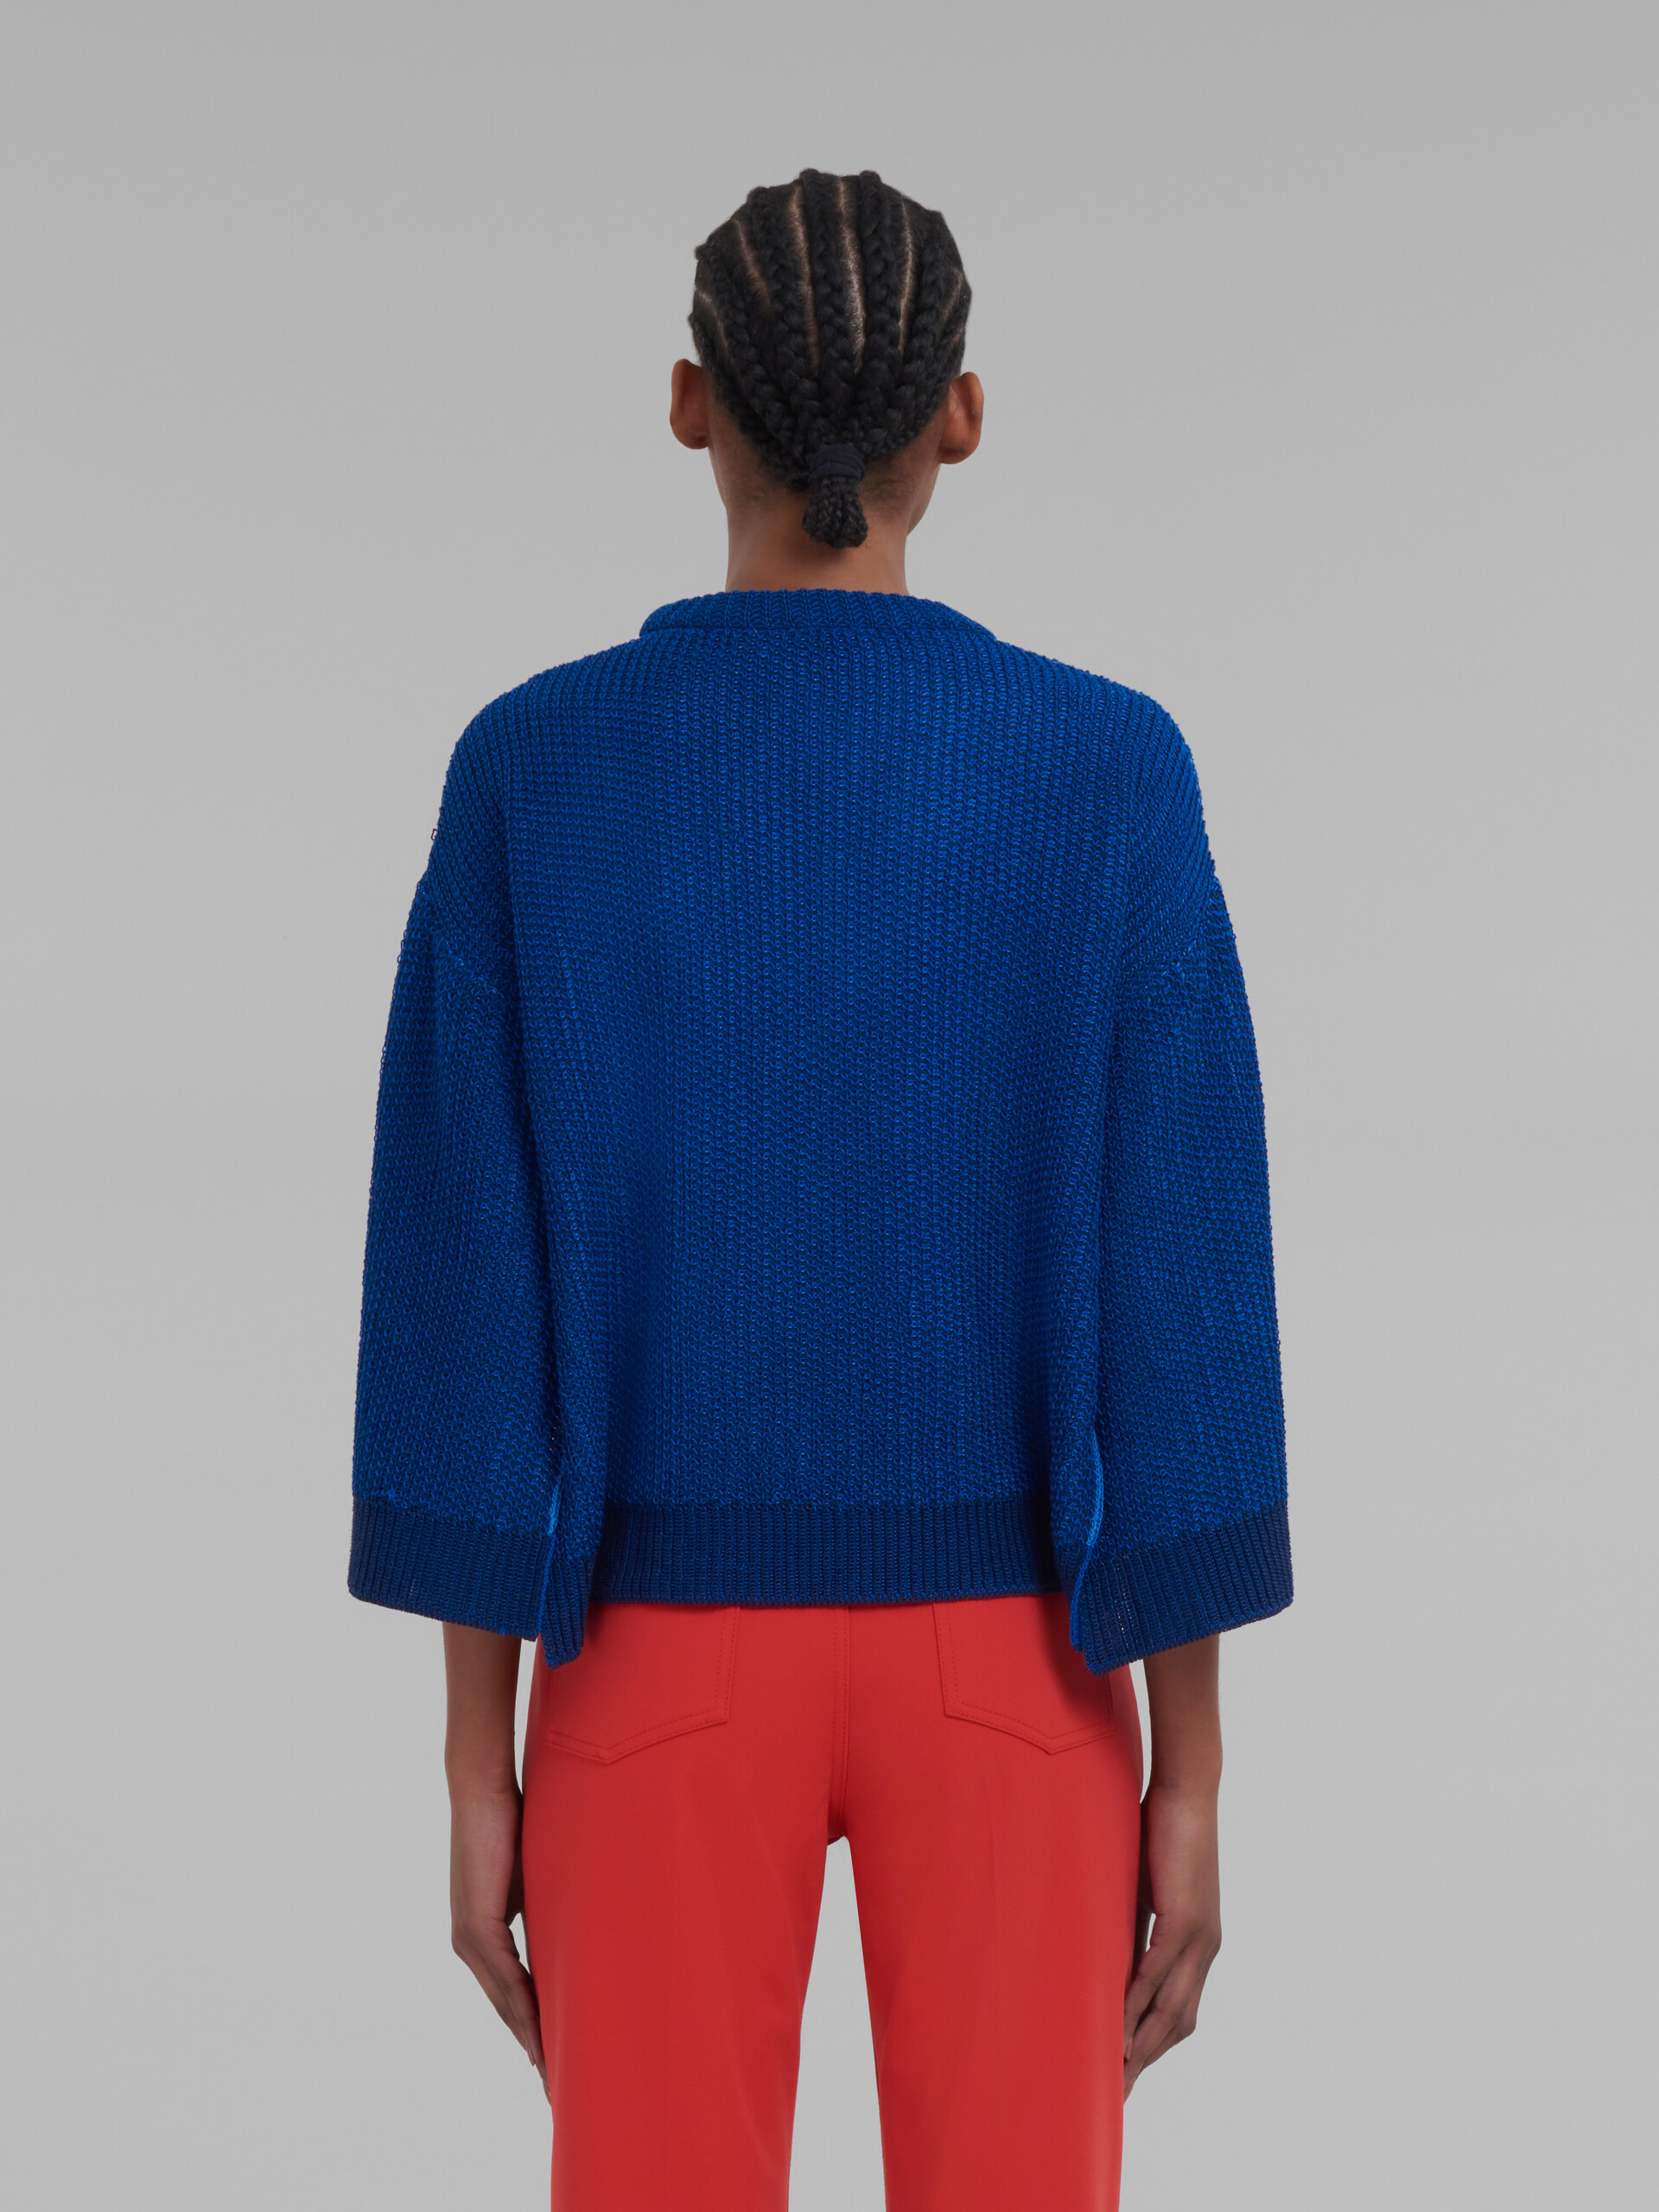 Blue cotton jumper with kimono sleeves - Pullovers - Image 3